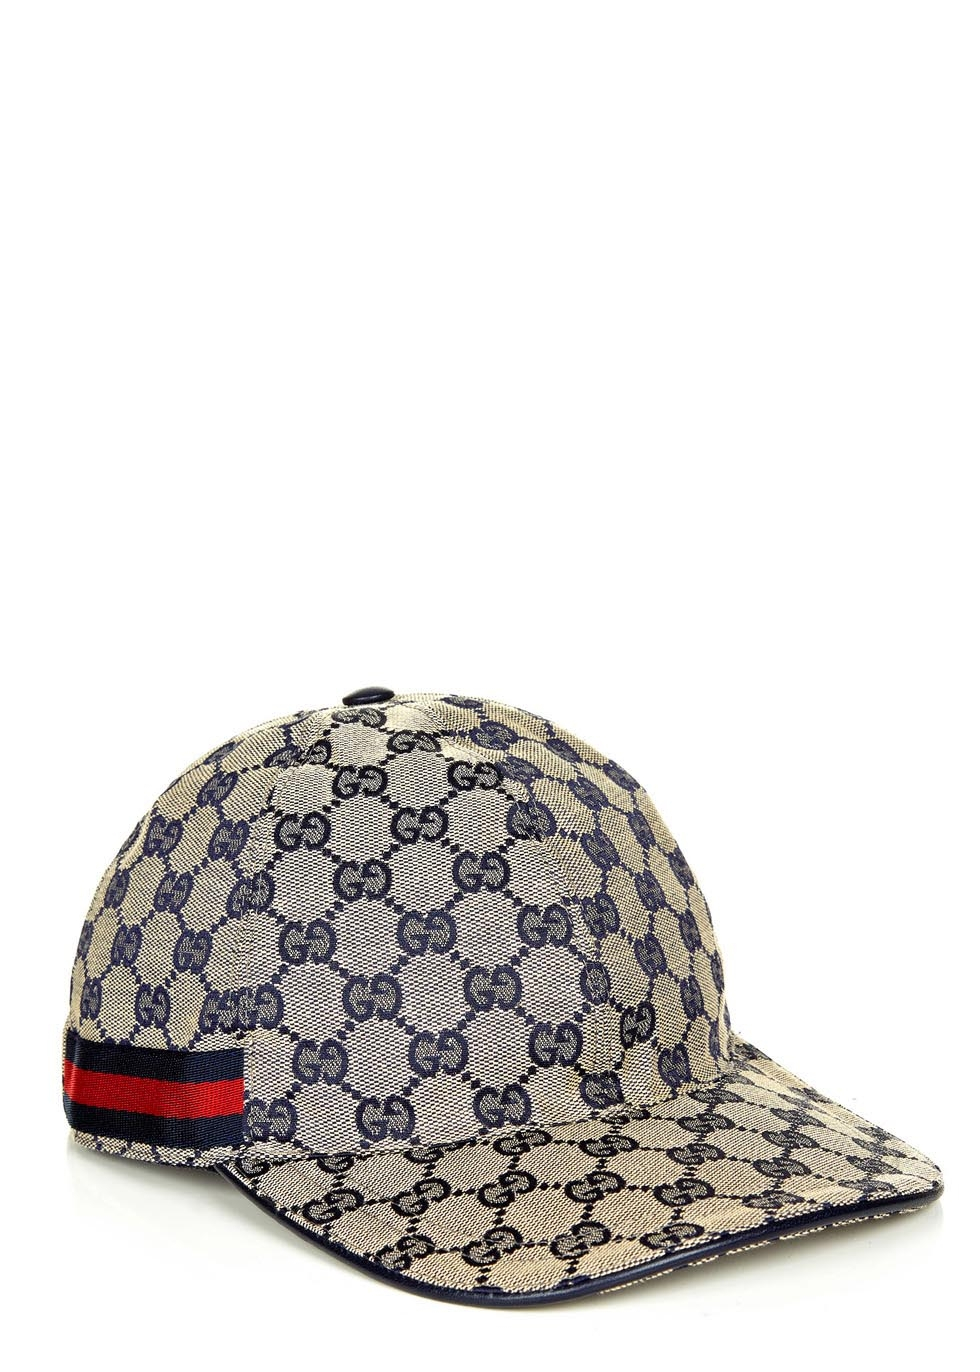 Gucci Gg Navy Canvas Cap in Grey for Men - Lyst